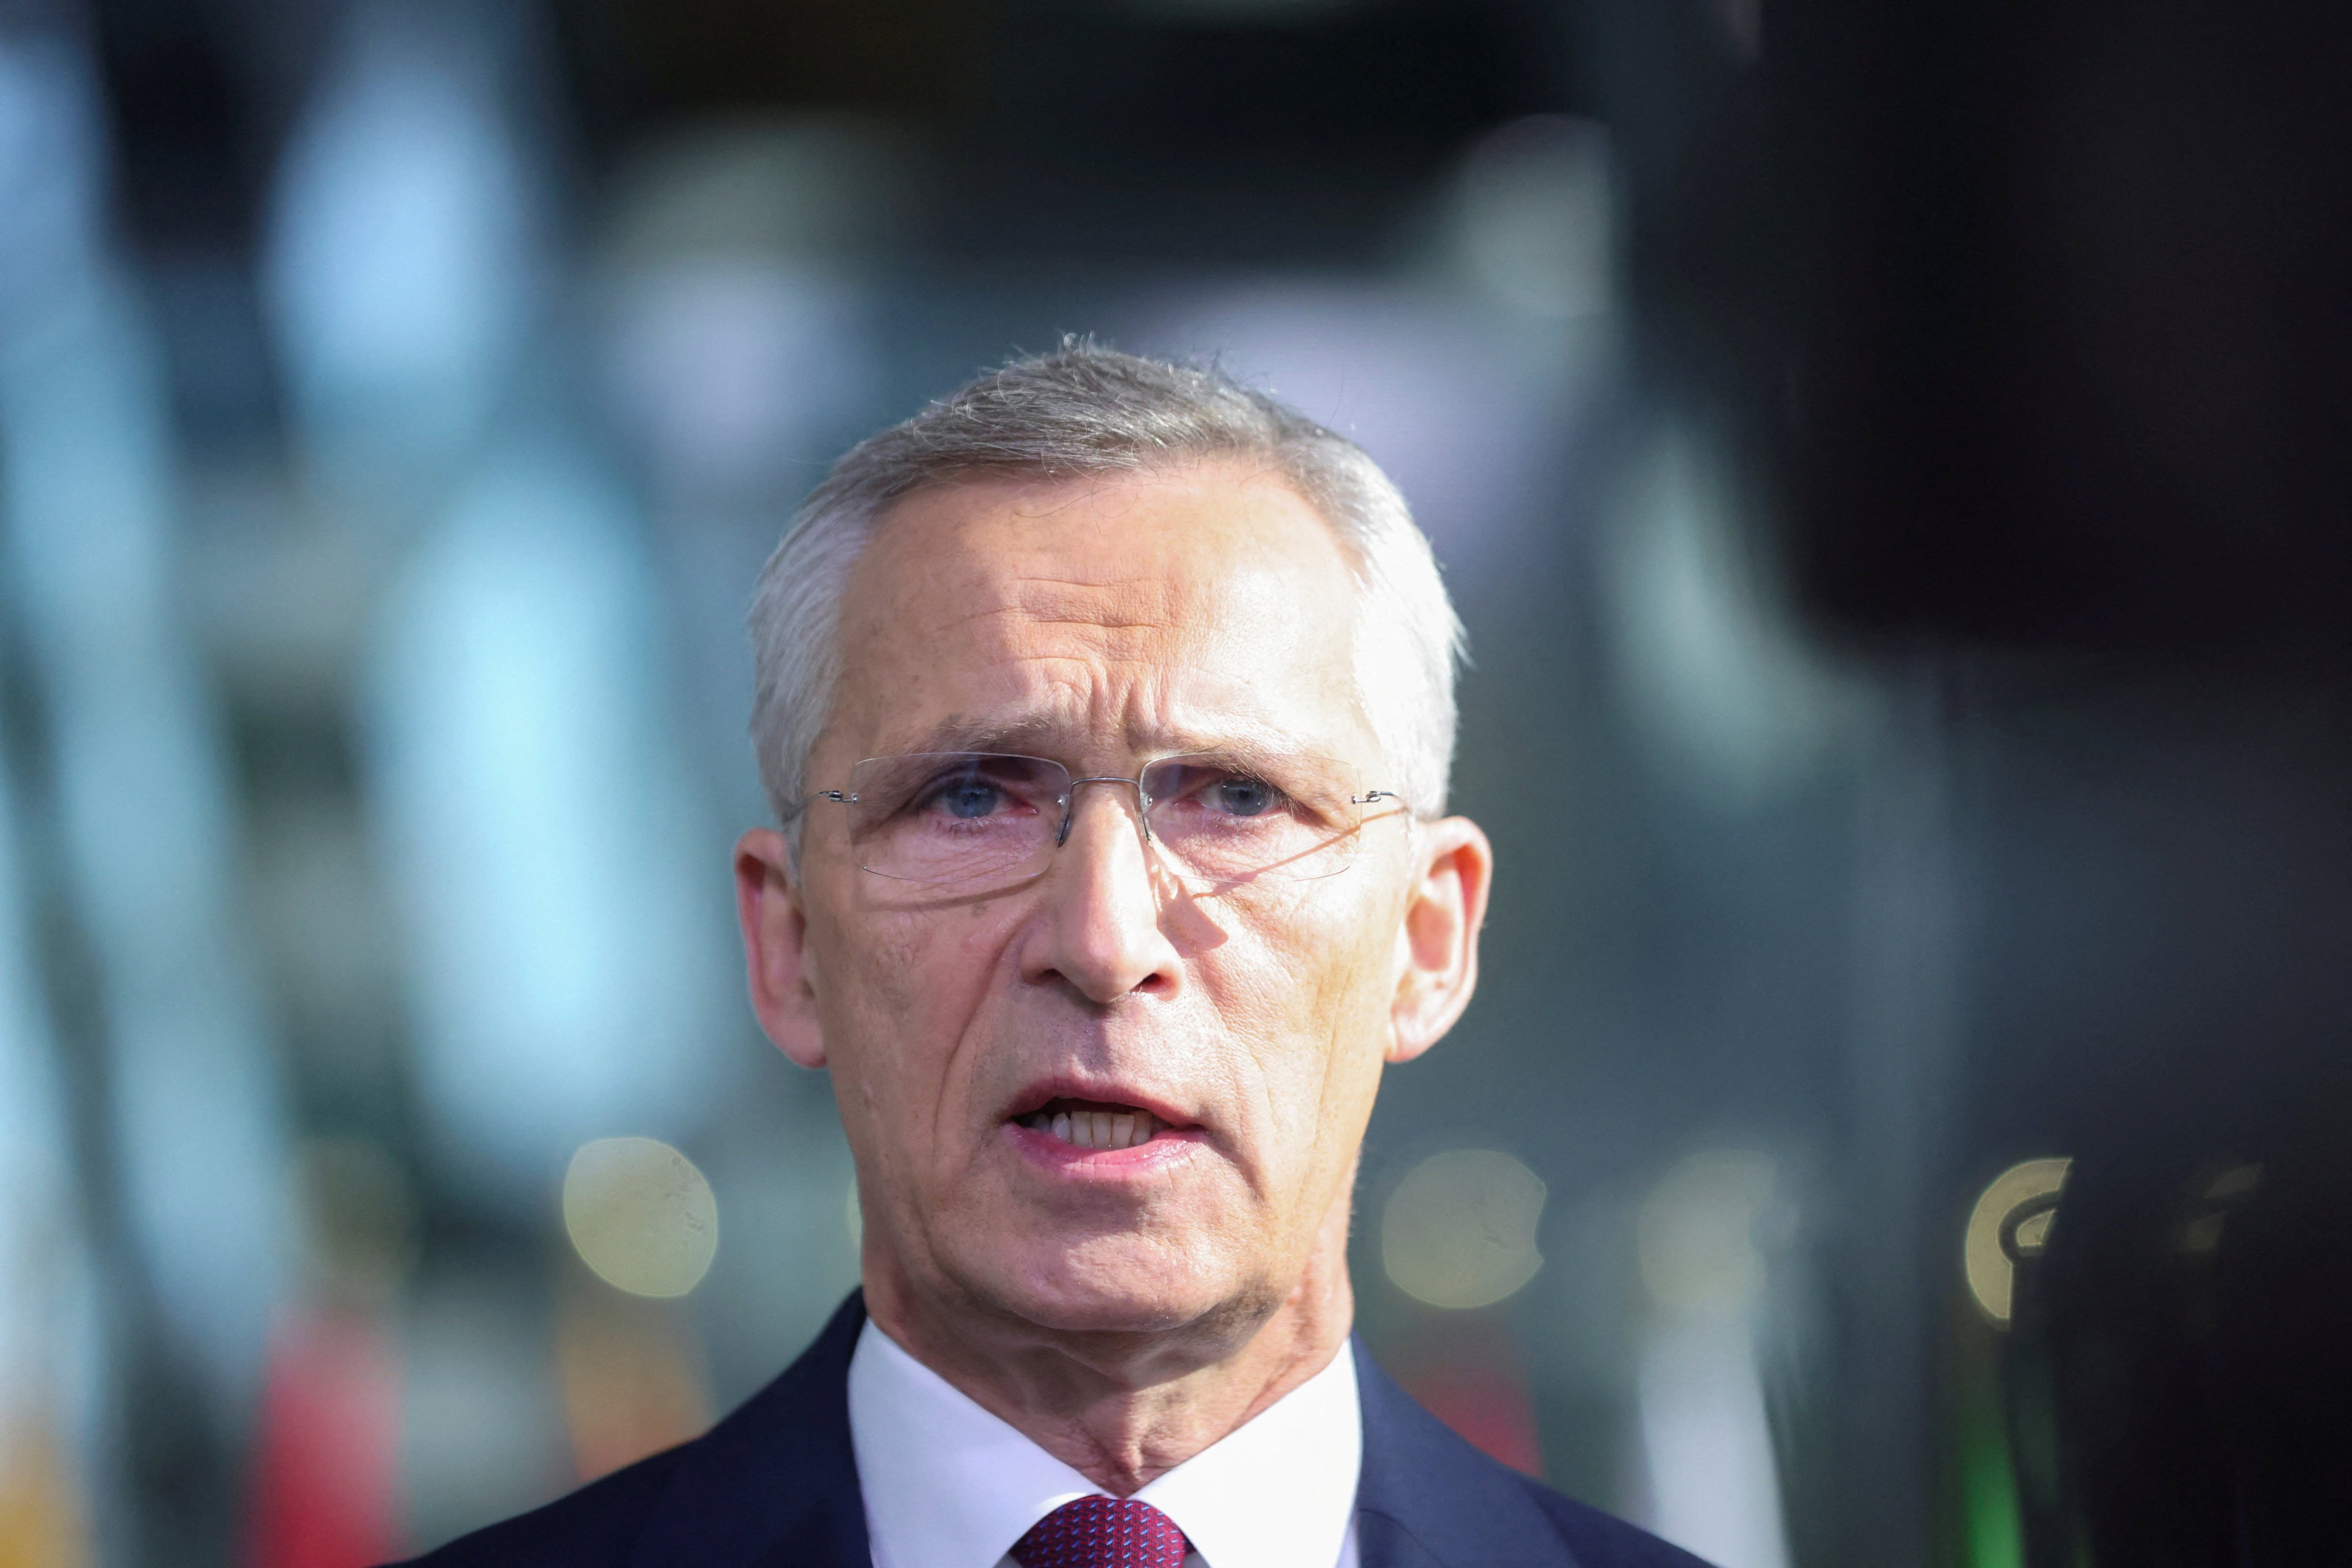 Nato Secretary General Jens Stoltenberg’s visit to Washington on Monday comes a month before the transatlantic security alliance holds a summit in the American capital. Photo: Reuters